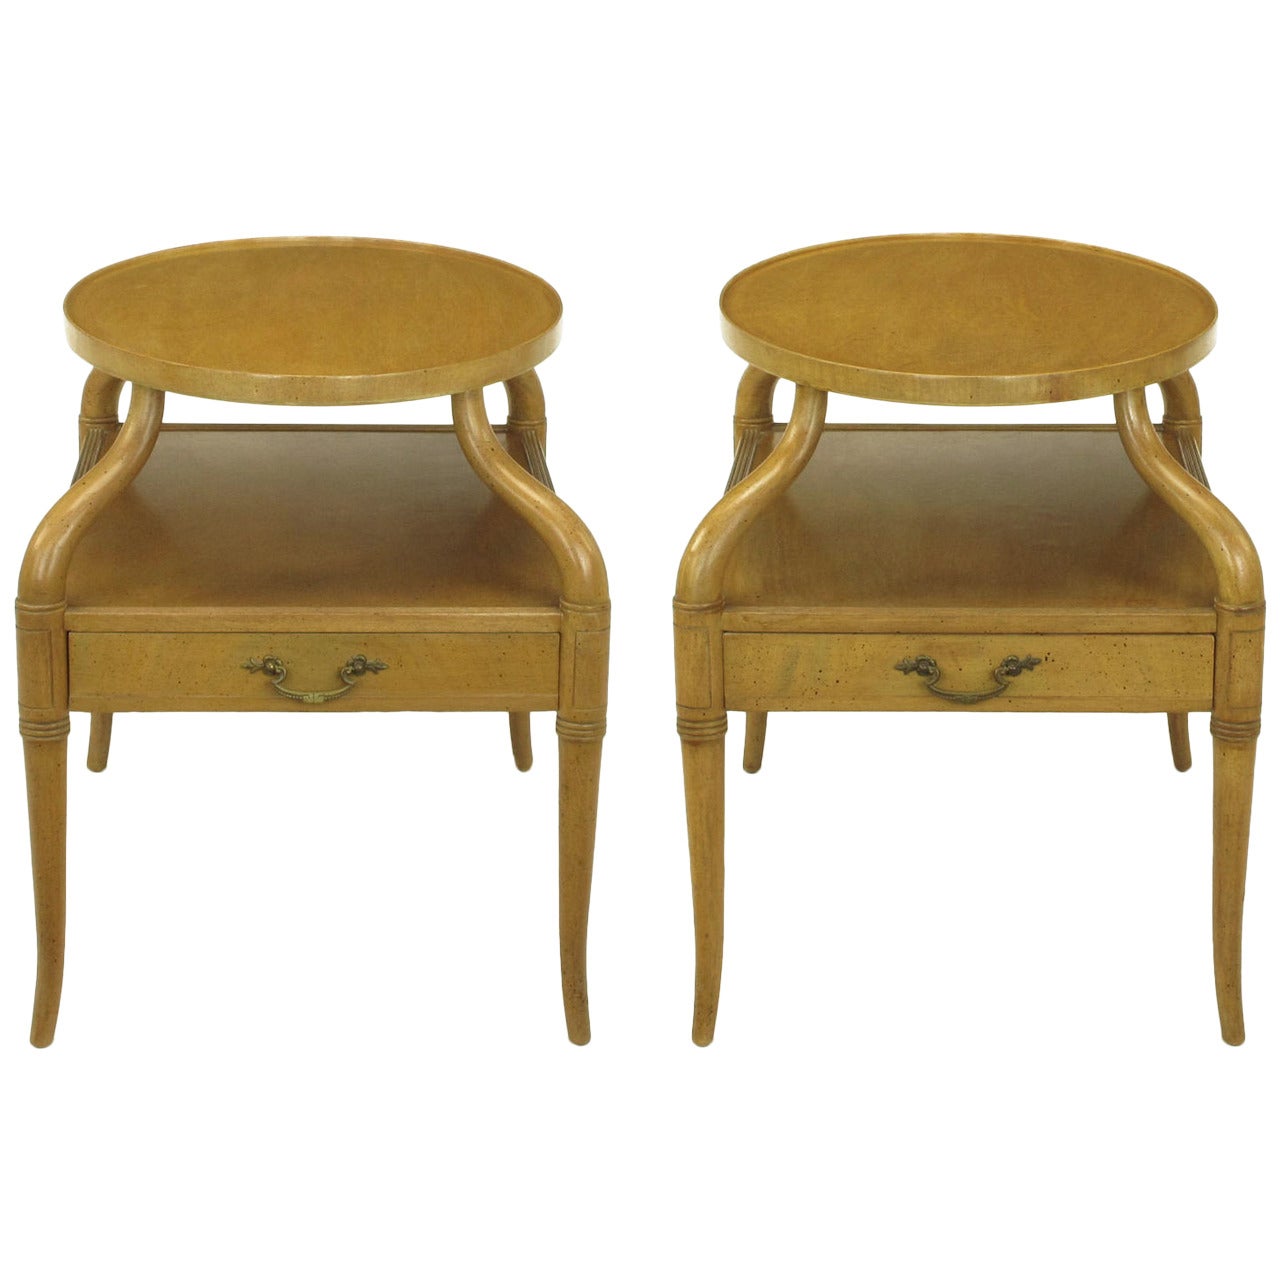 Pair of 1940s Mahogany Plateau Side Tables with Sinuous Legs